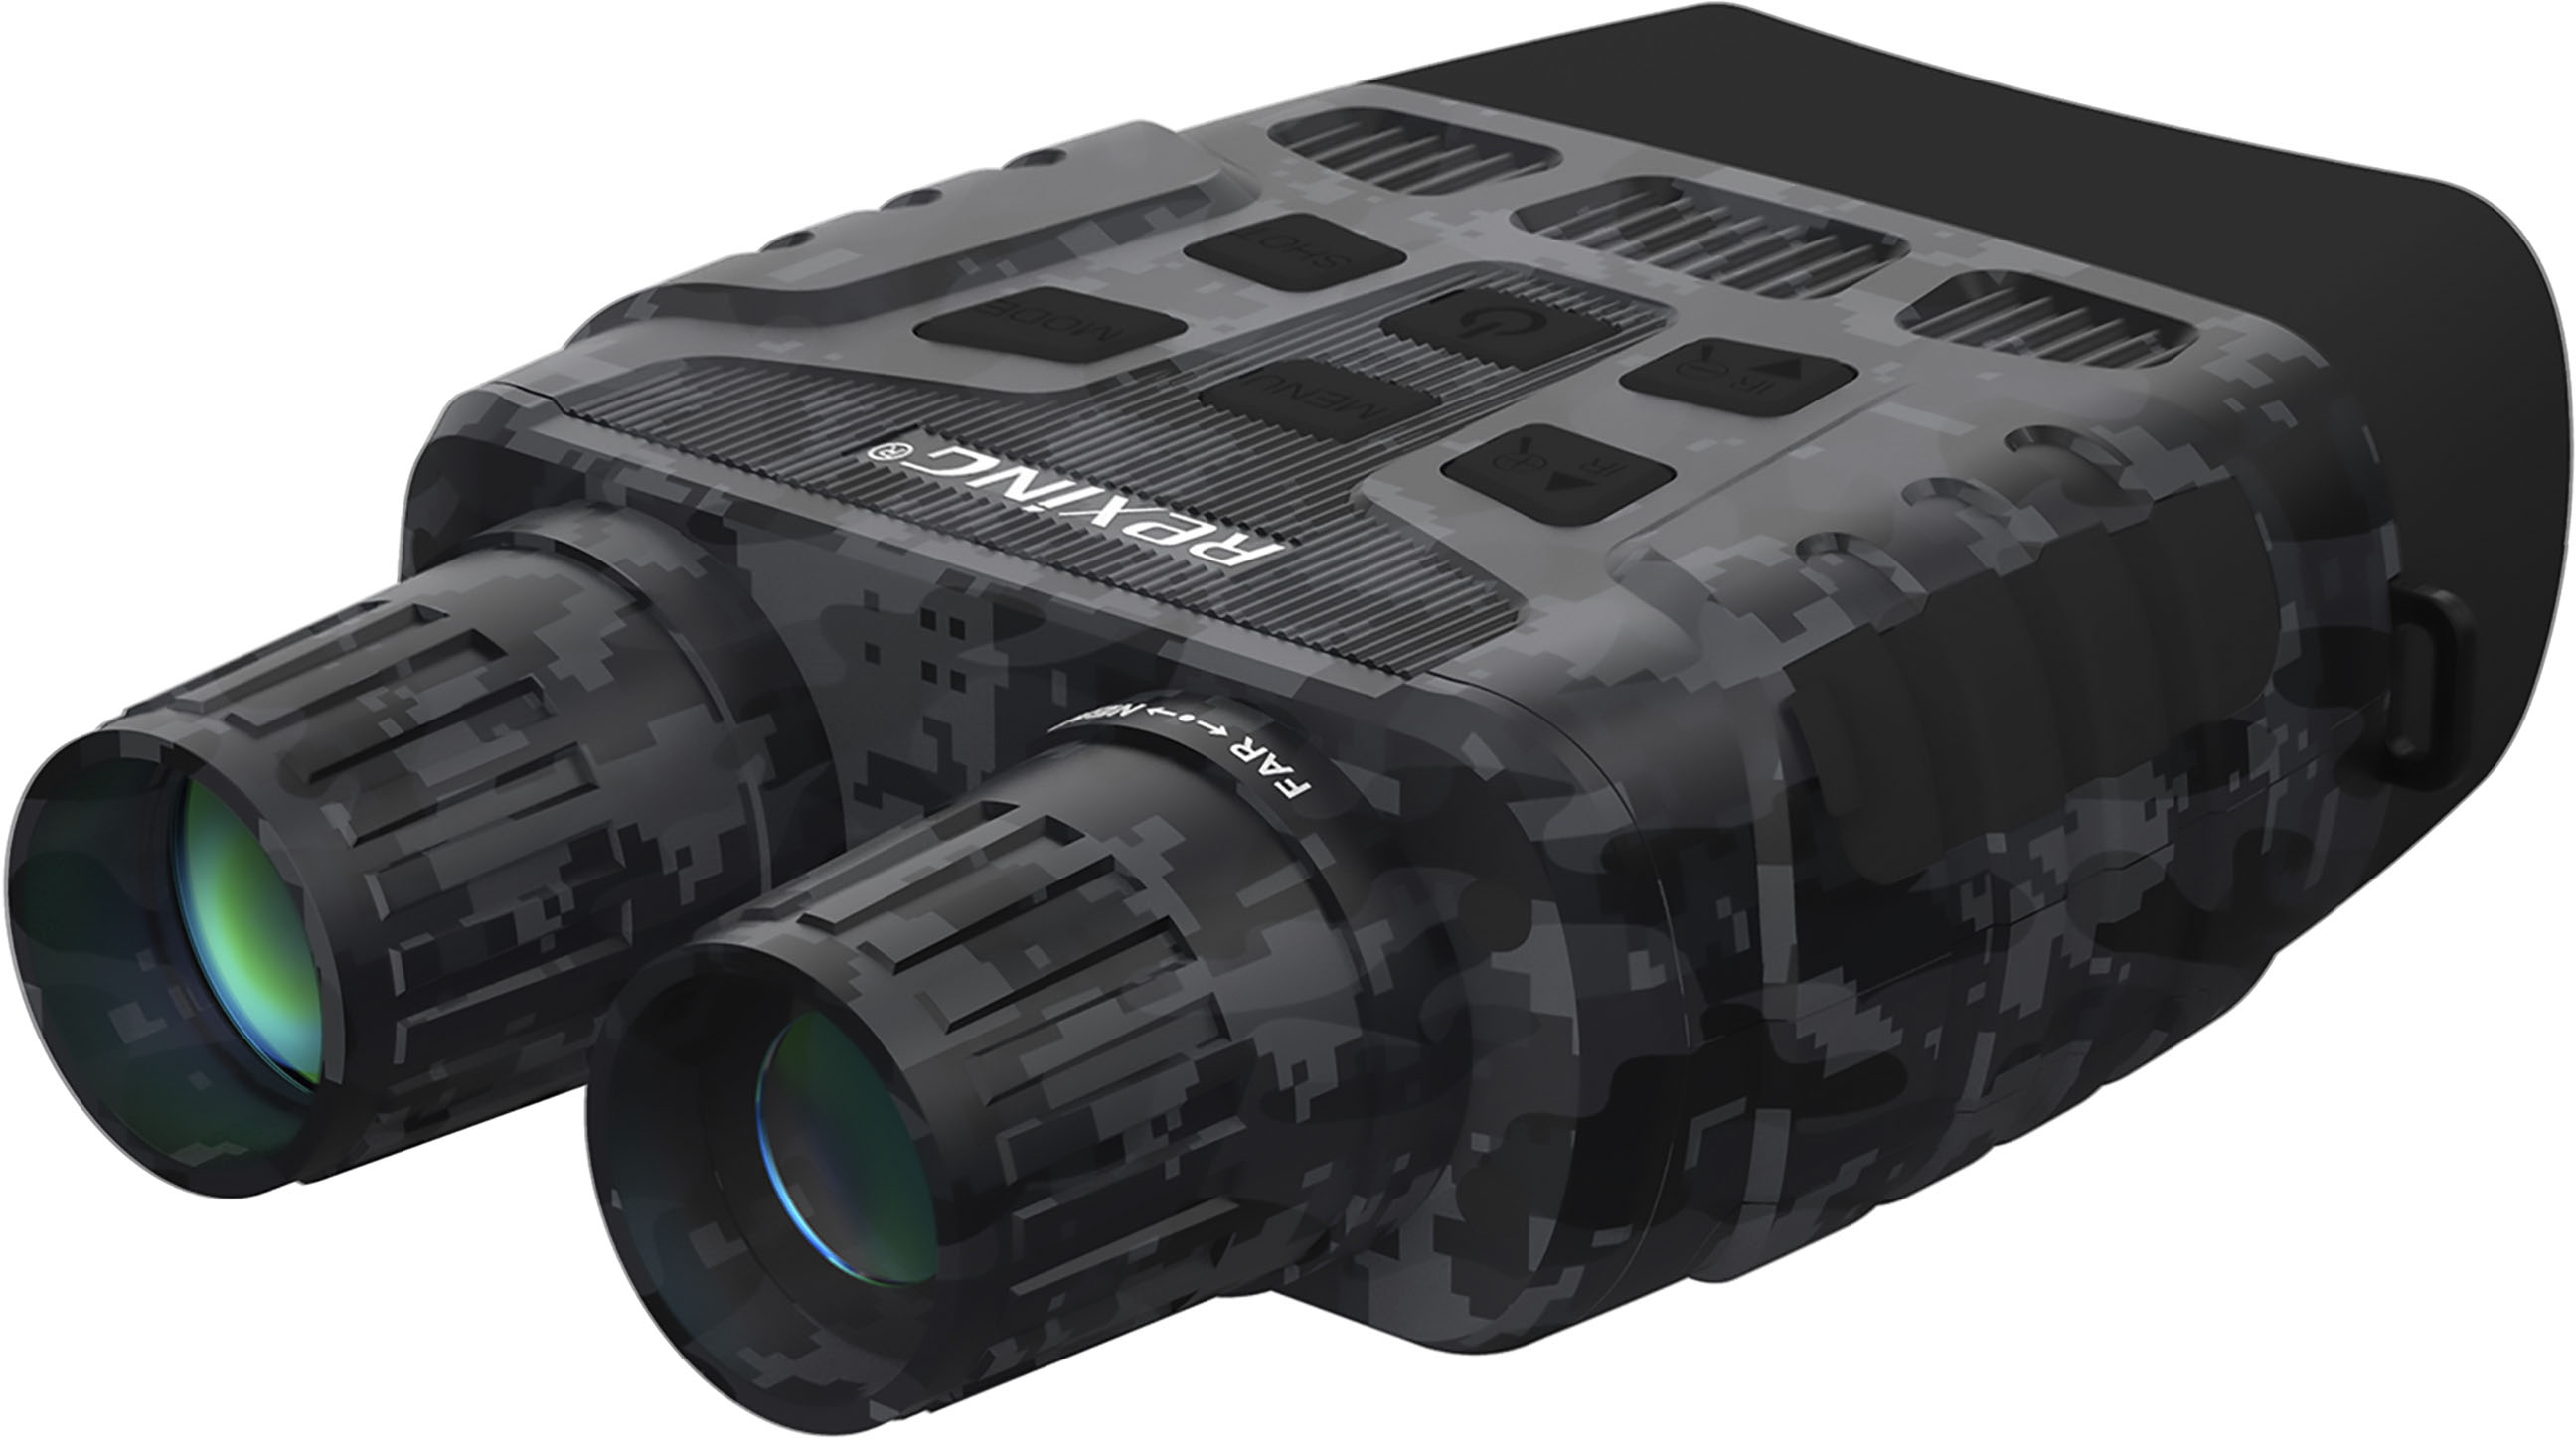 Questions and Answers: Rexing B1 10 x 25 Digital Night Vision ...